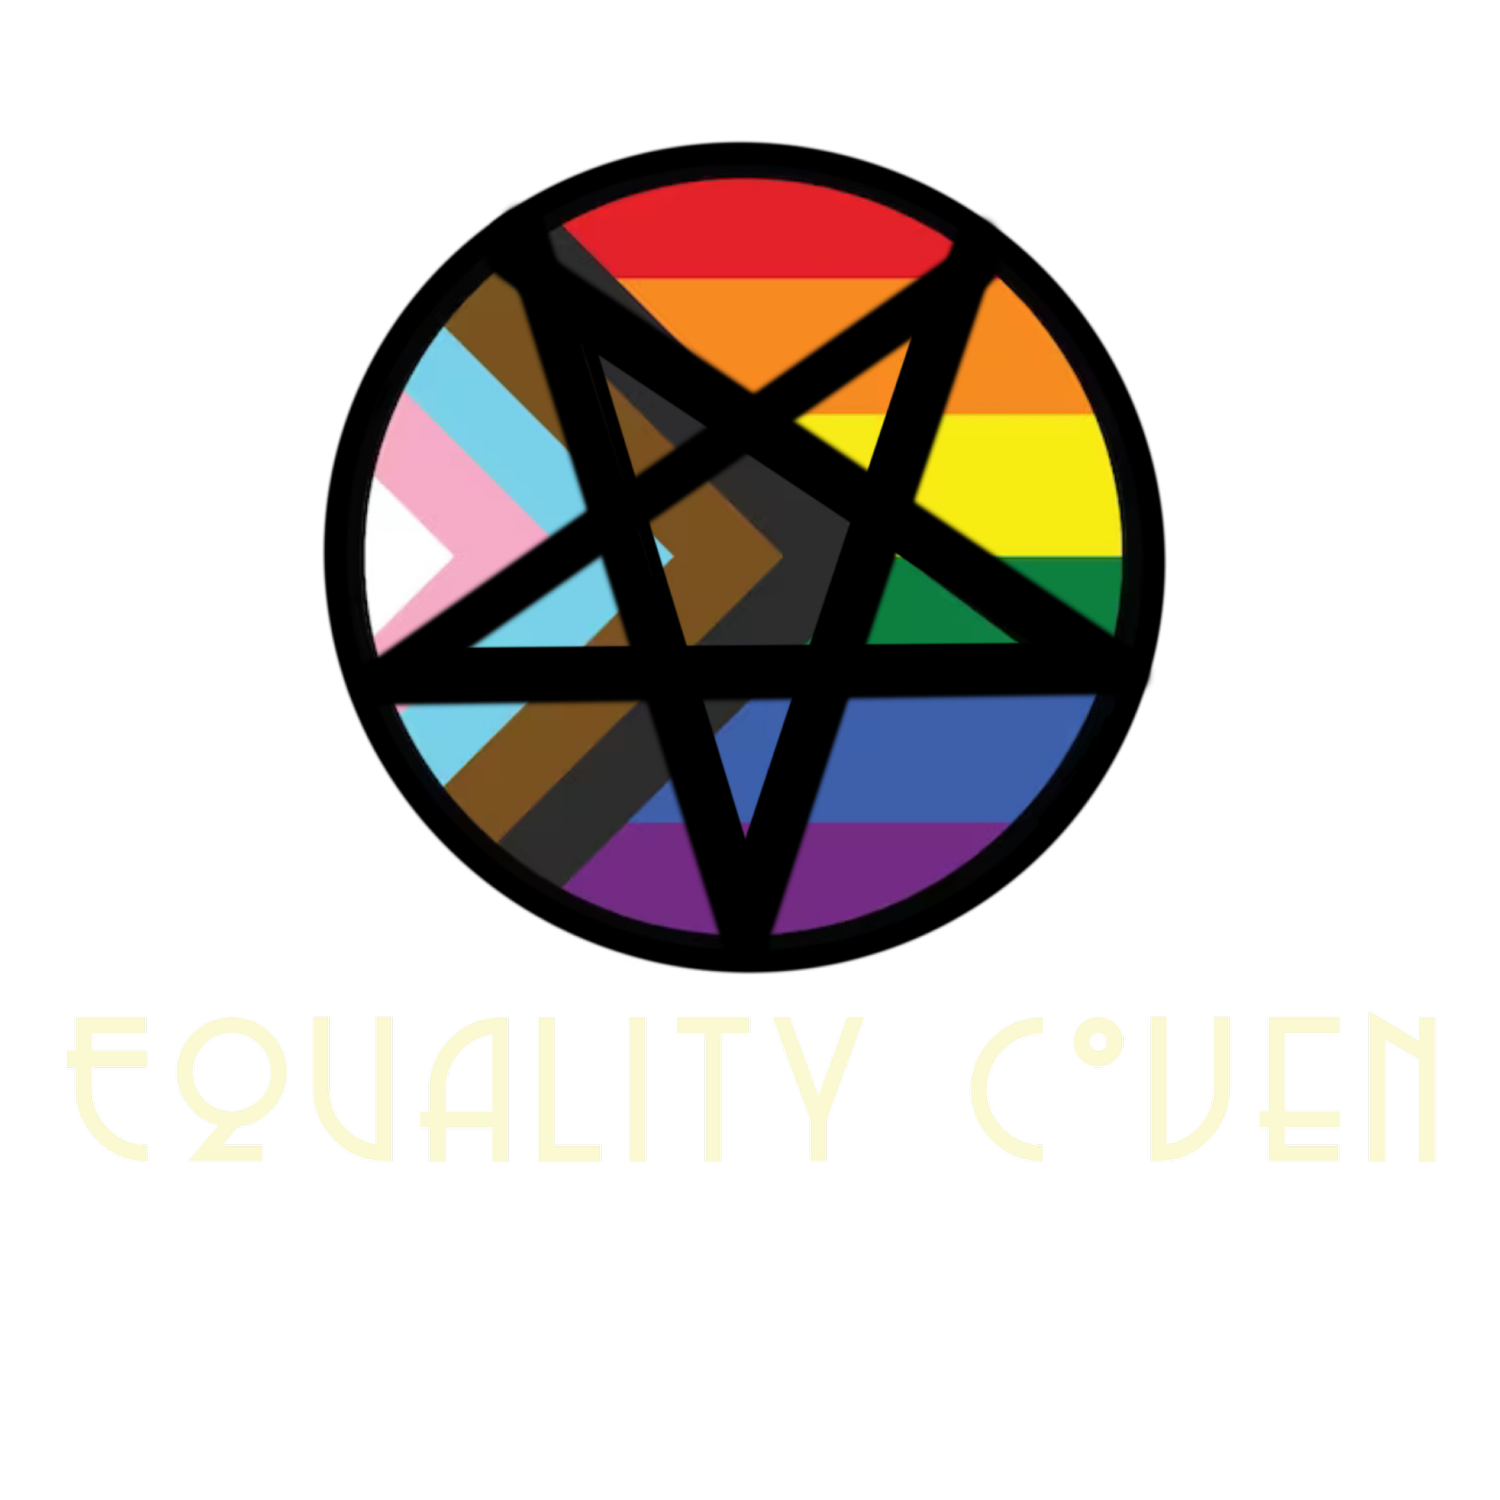 Equality Coven